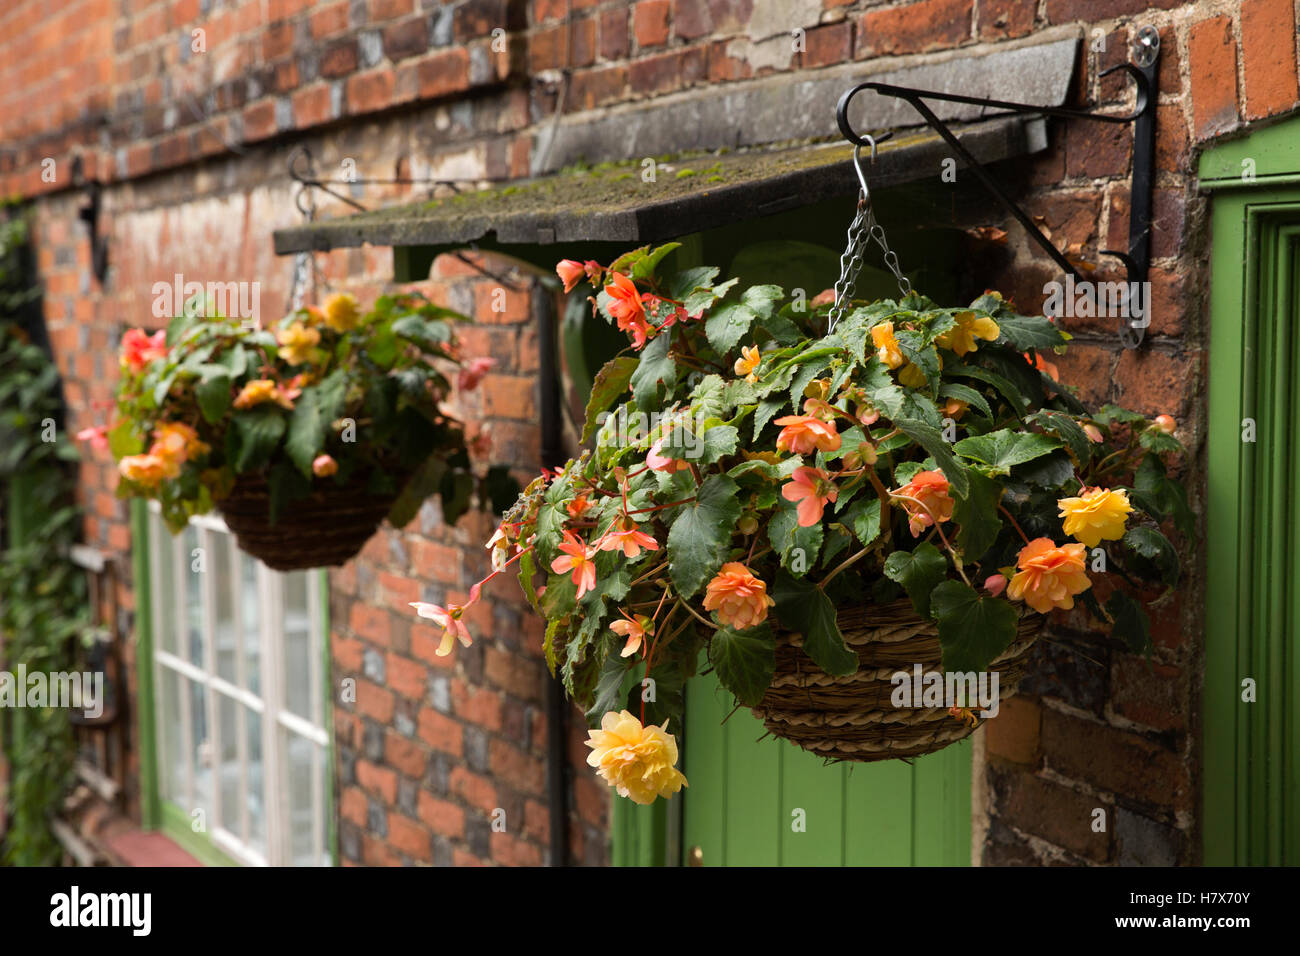 UK, England, Buckinghamshire, West Wycombe, Church Lane, begonia flowers in autumnal floral hanging baskets outside house door Stock Photo